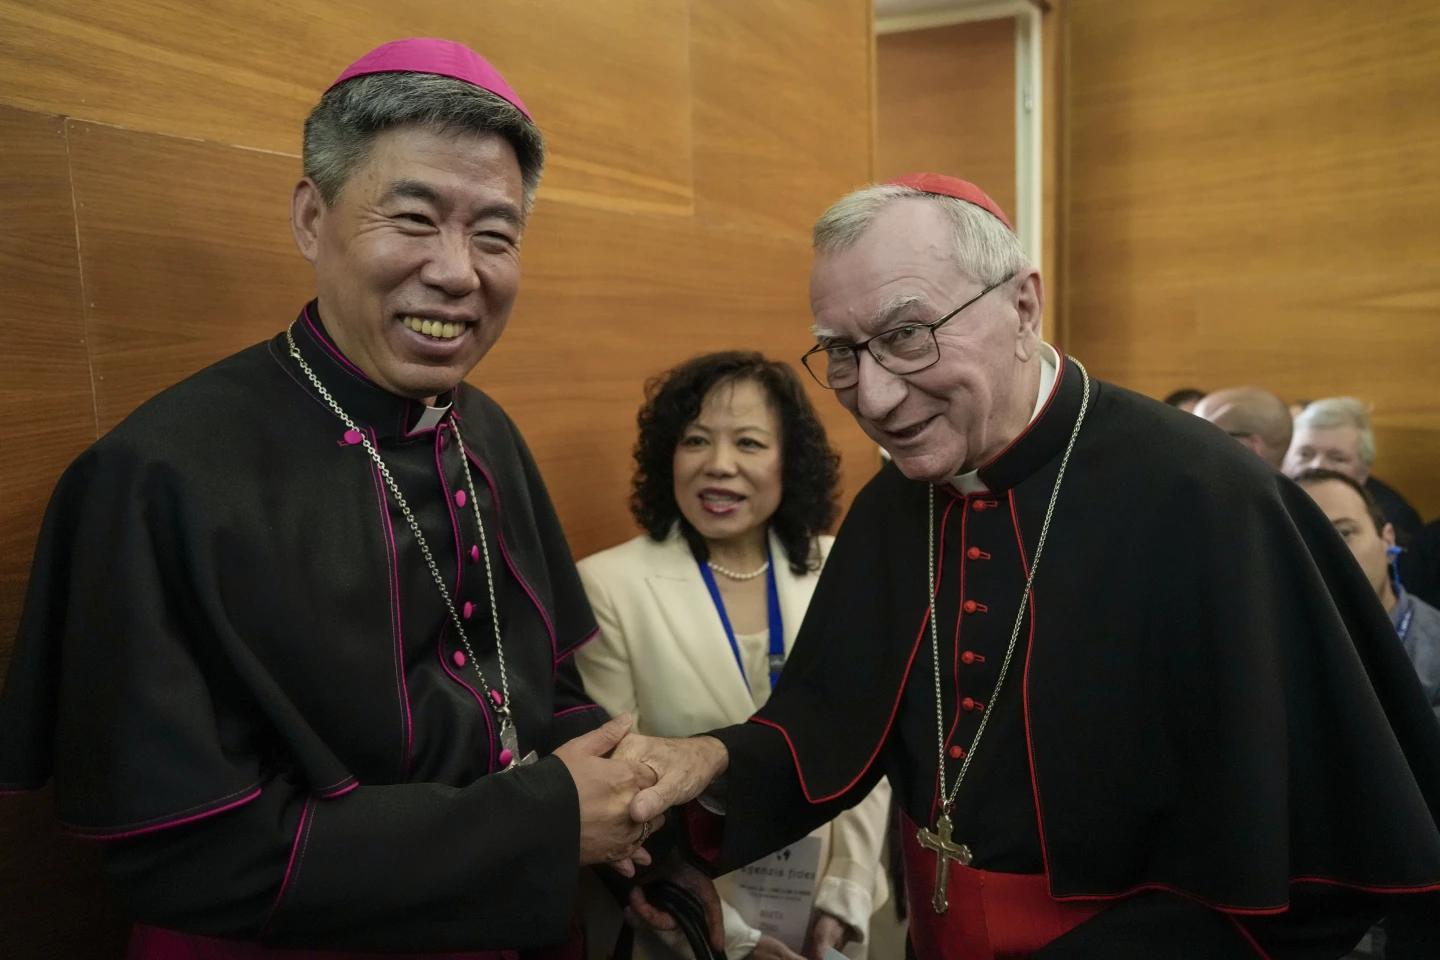 Vatican offers assurances as China outlines rules for dialogue